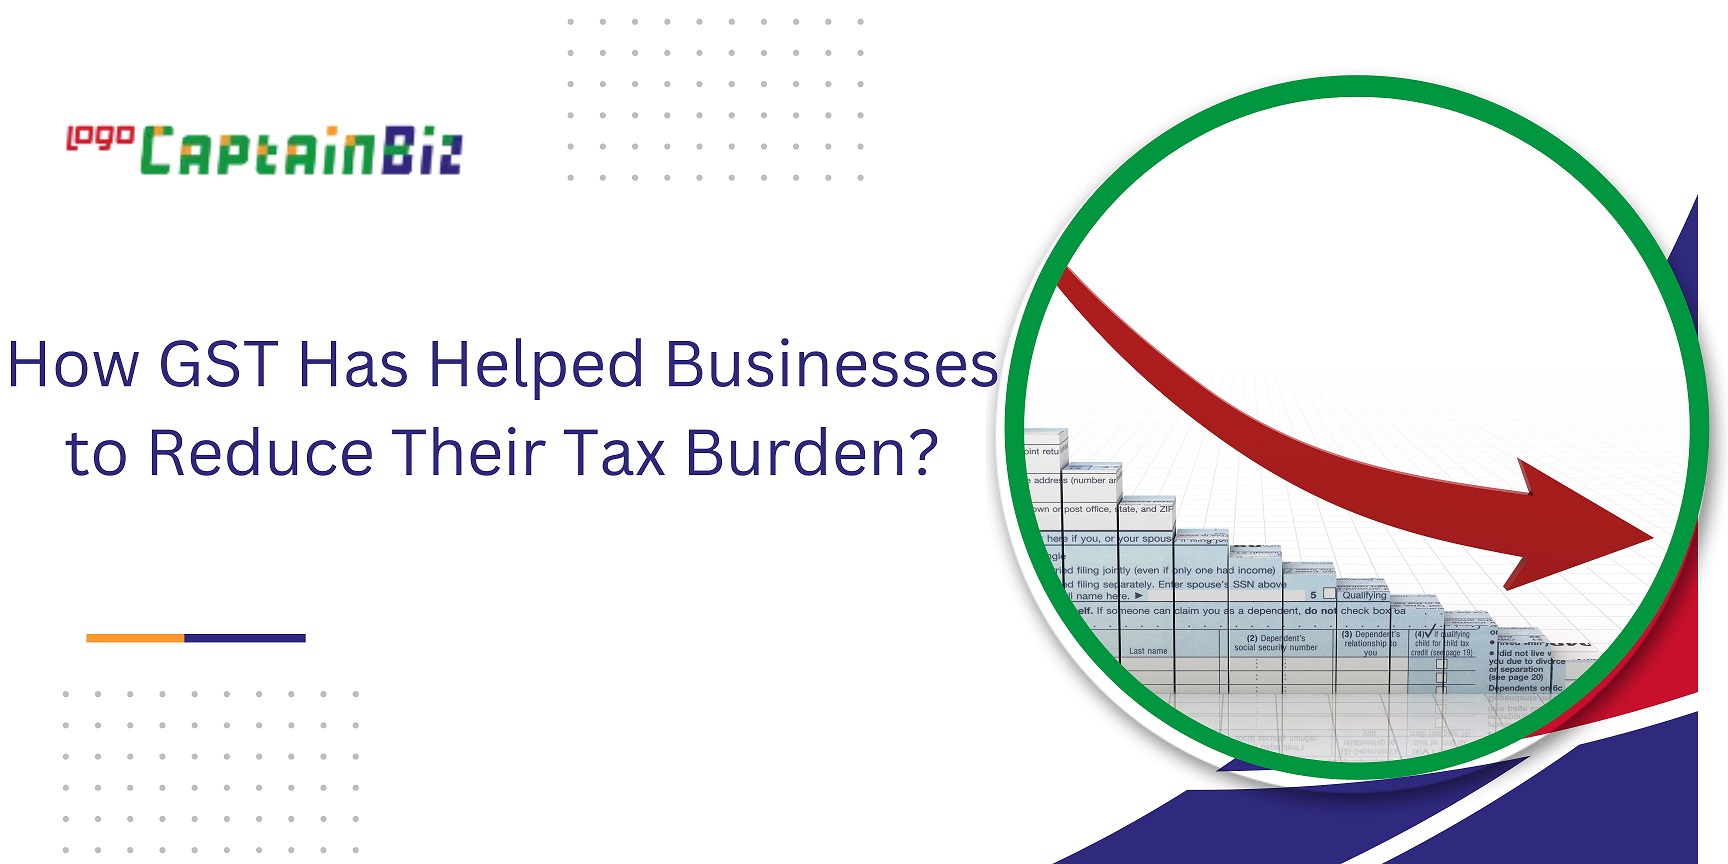 CaptainBiz:How GST Has Helped Businesses to Reduce Their Tax Burden